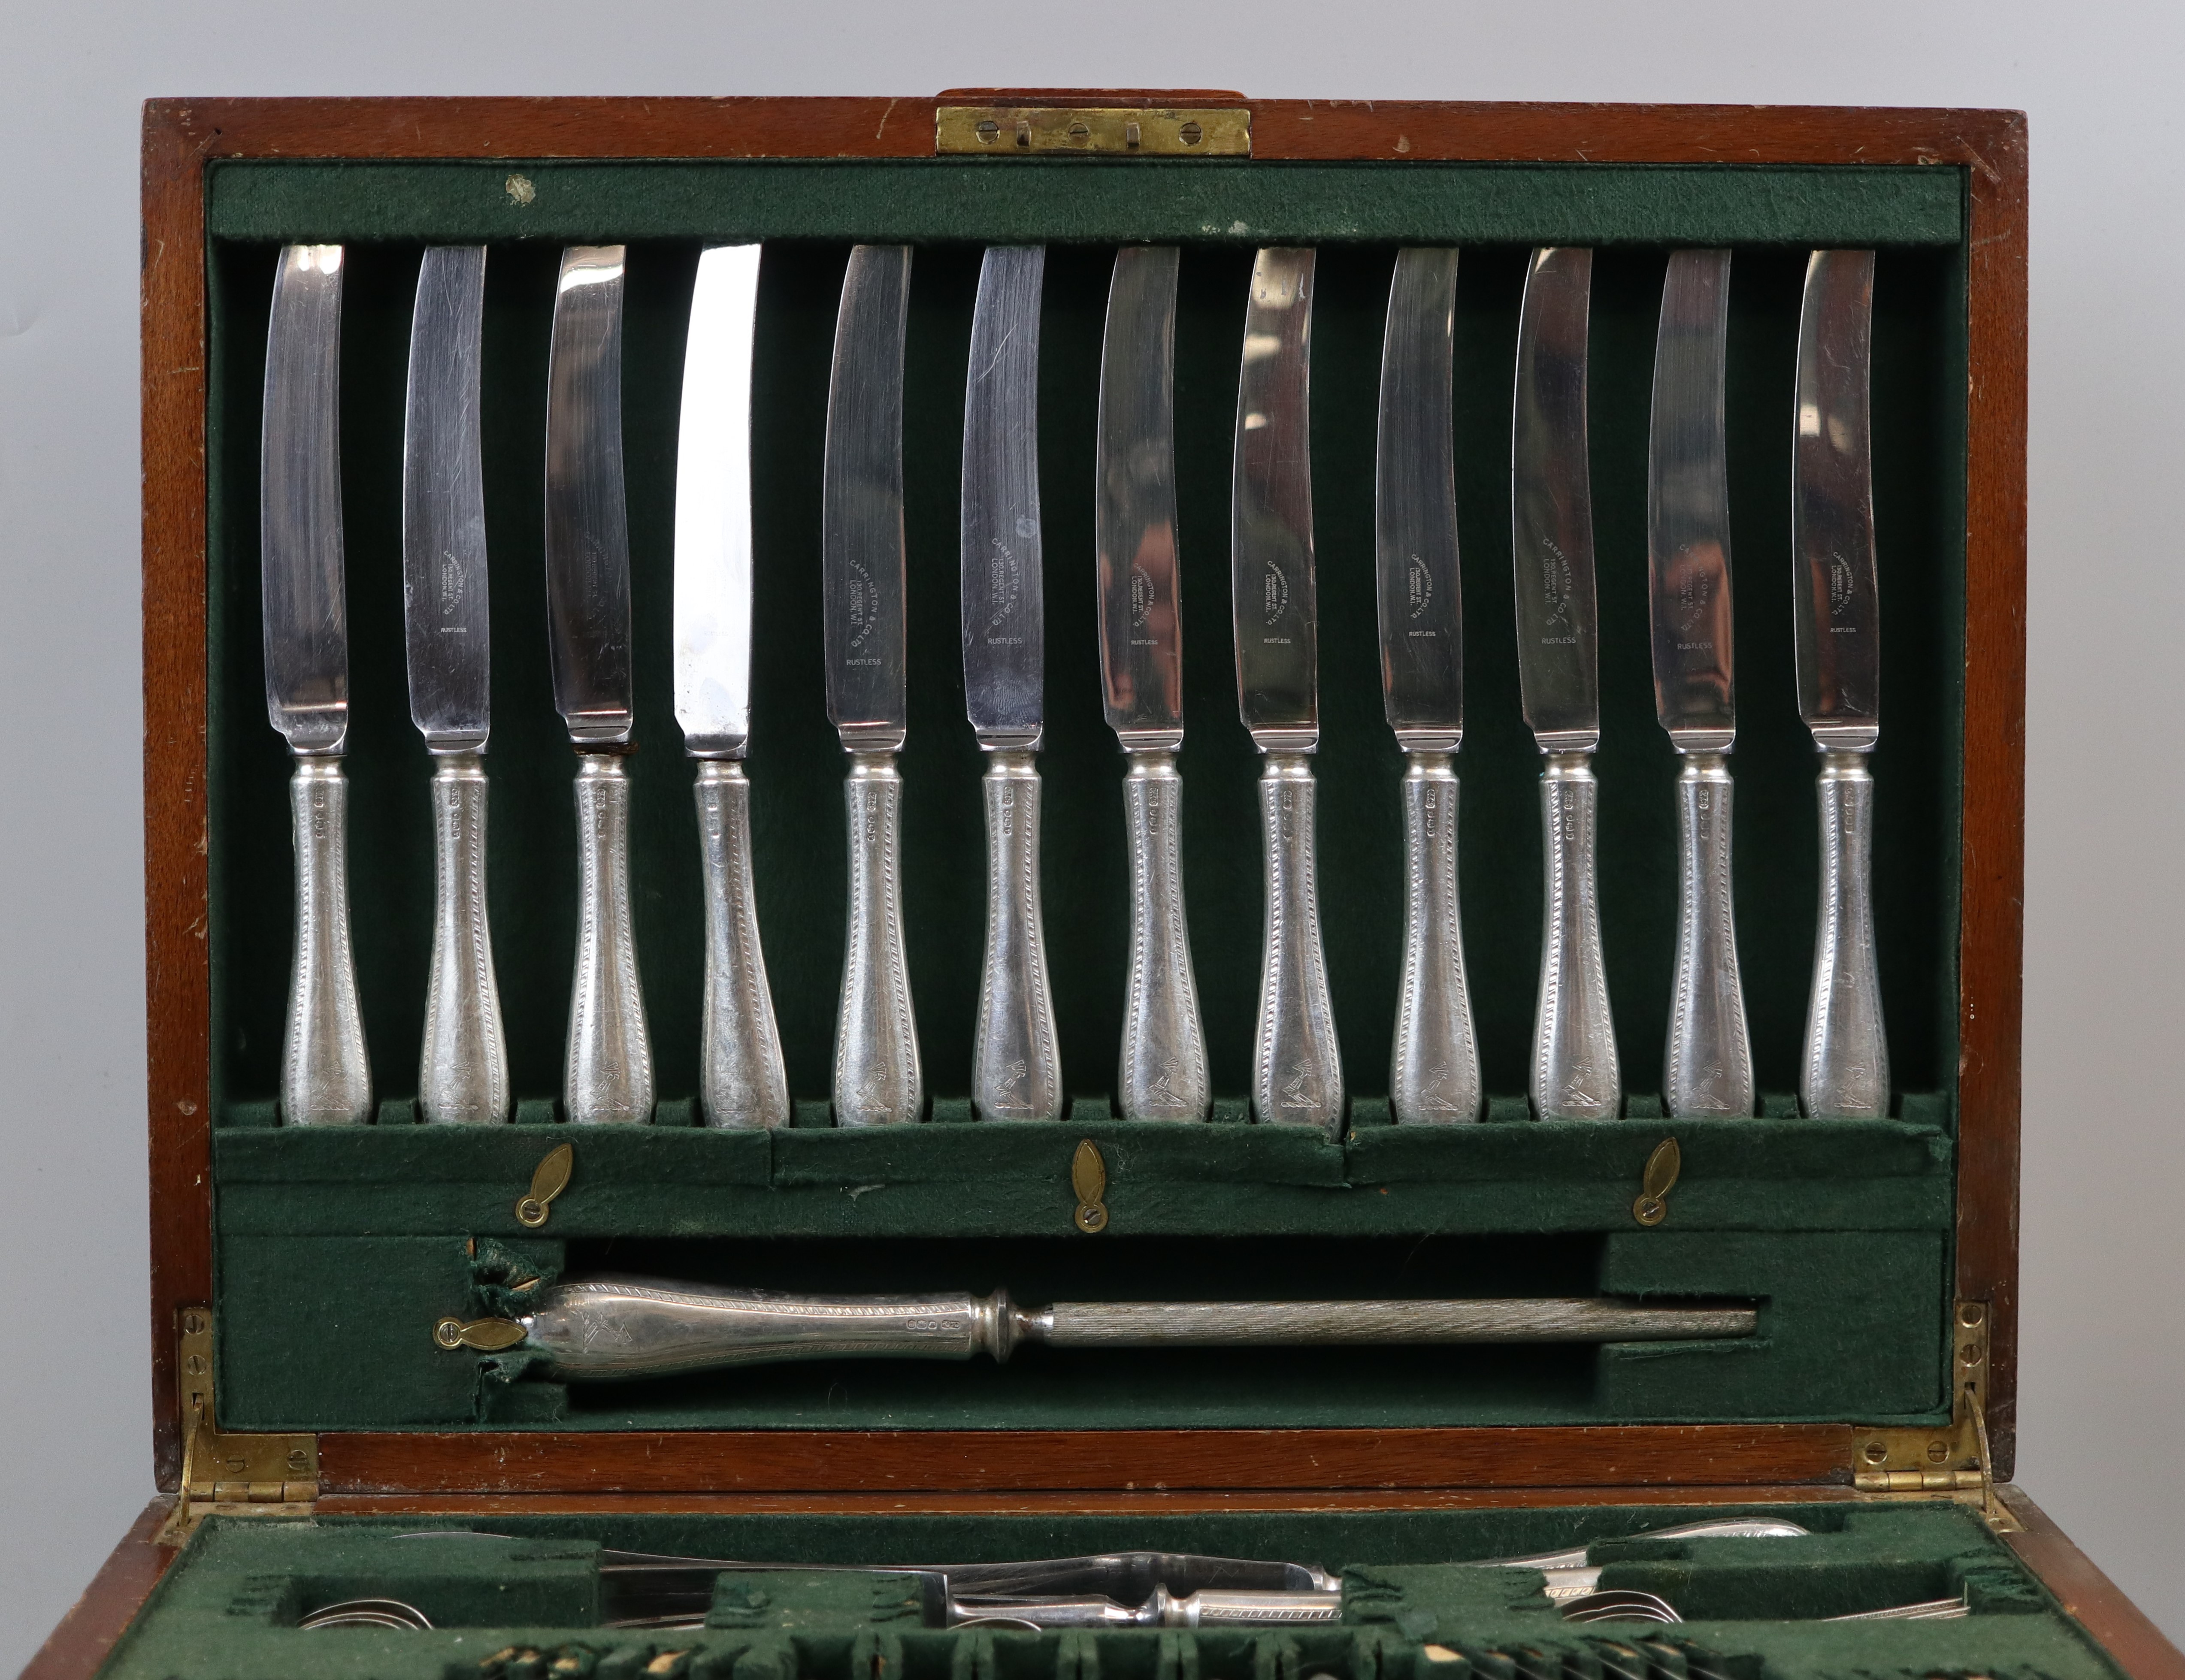 Canteen of hallmarked silver cutlery - Carrington and Co 1961 - over 3.4kg of silver - Image 3 of 4